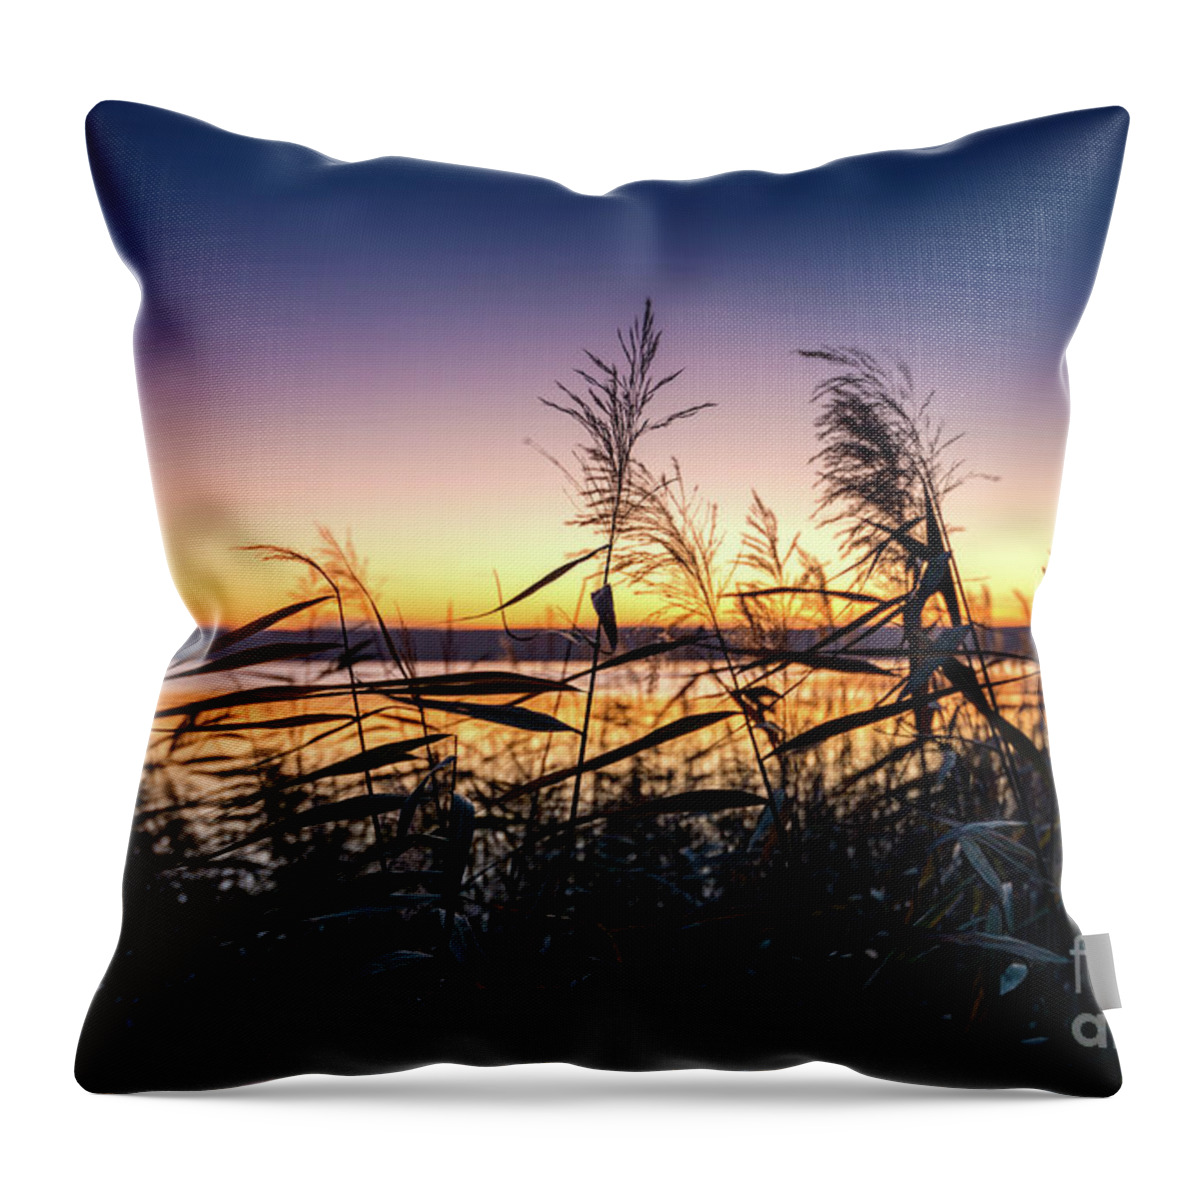 Ammersee Throw Pillow featuring the photograph Sunset Impression by Hannes Cmarits